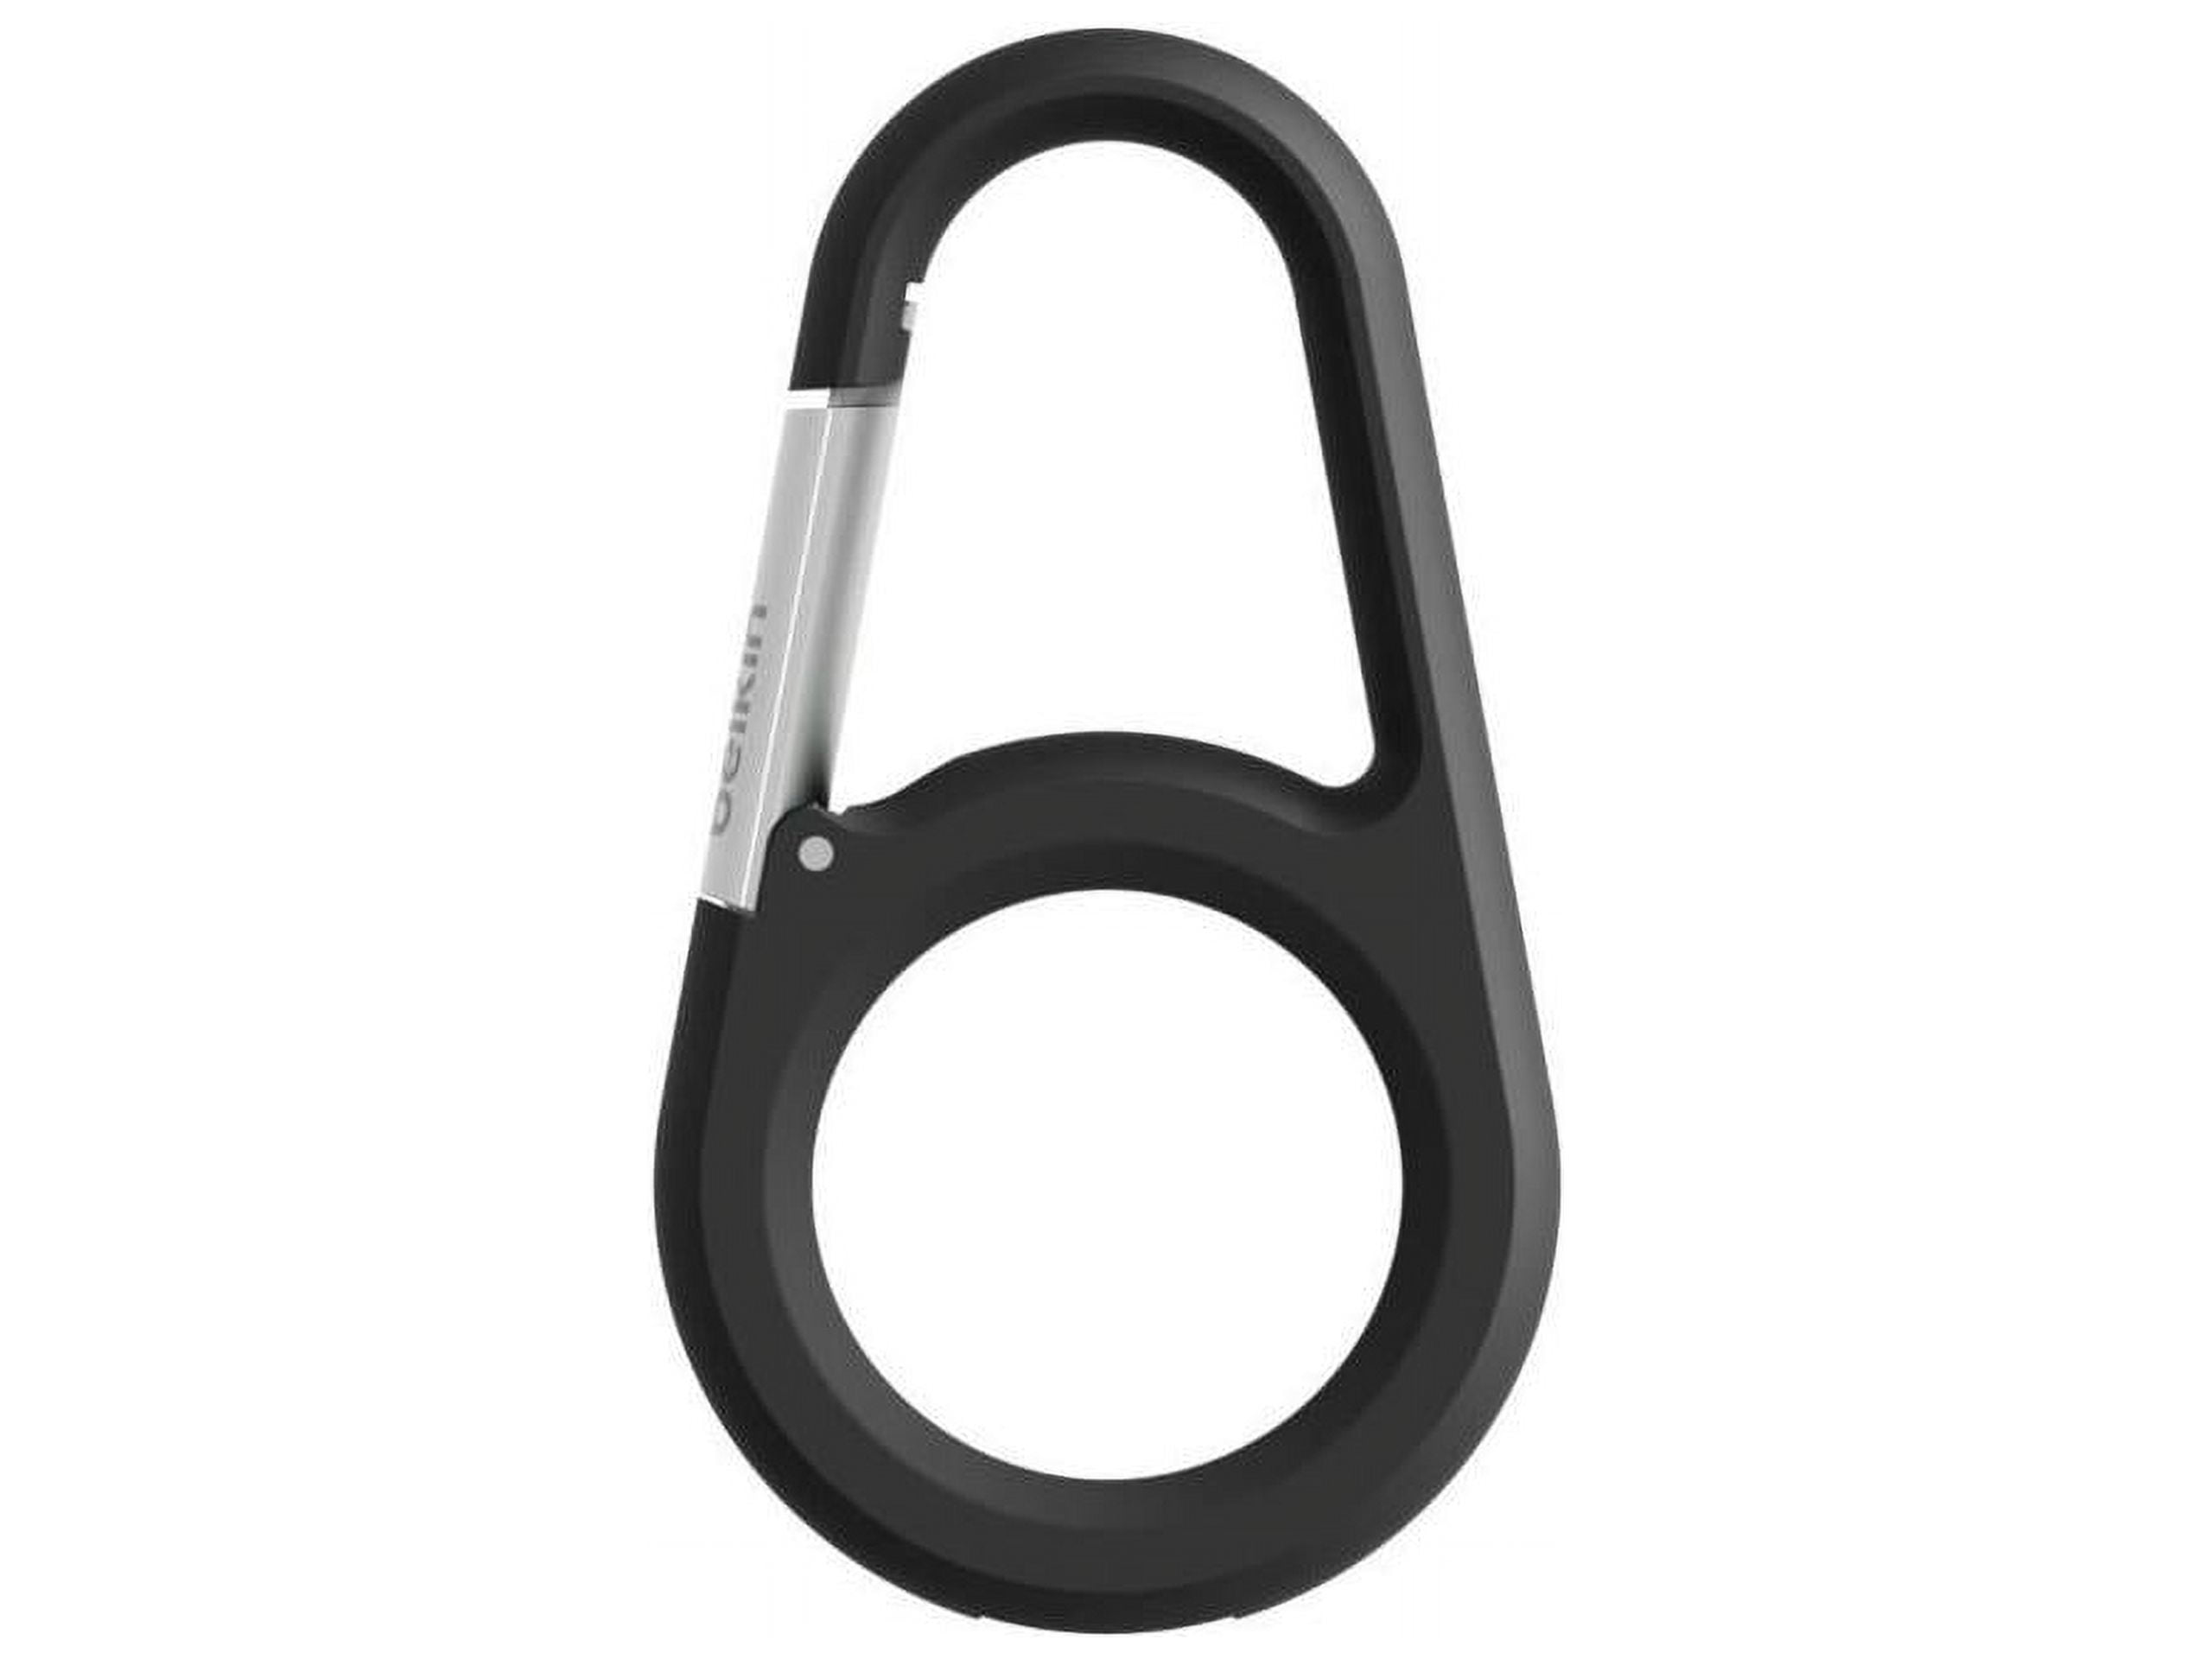 Belkin Secure Holder with Carabiner for Apple AirTag® (Red) Snap